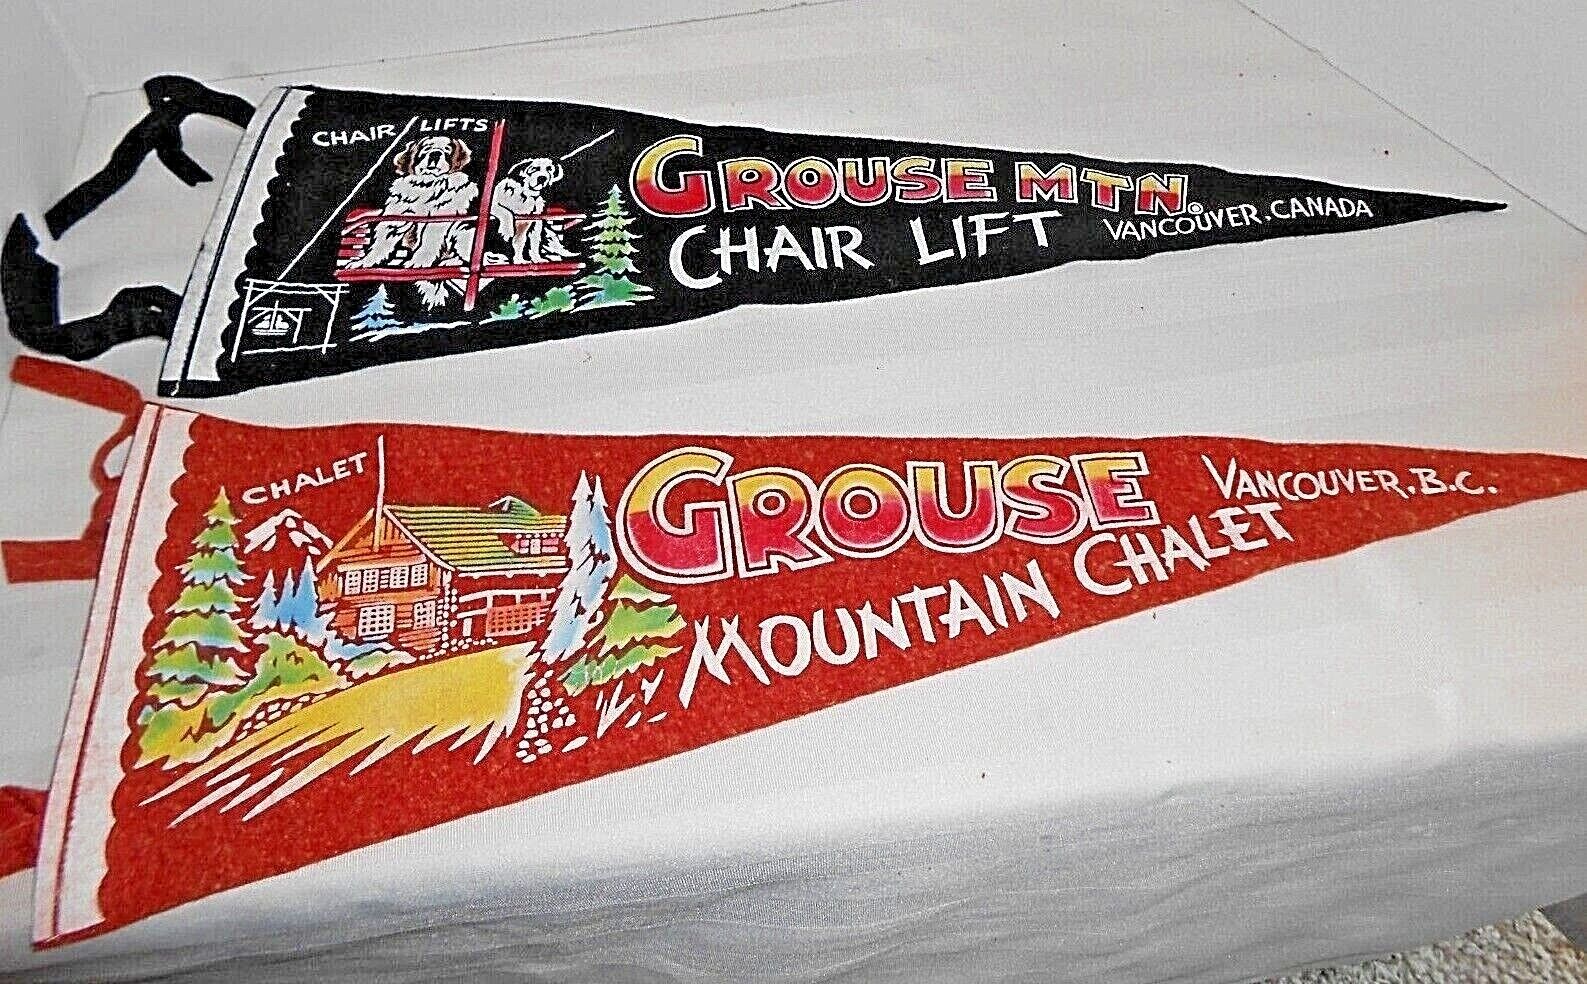 Grouse Mountain Chalet & Chair Lift 21" Pennants Lot of 2 Vancouver B.C.  Без бренда